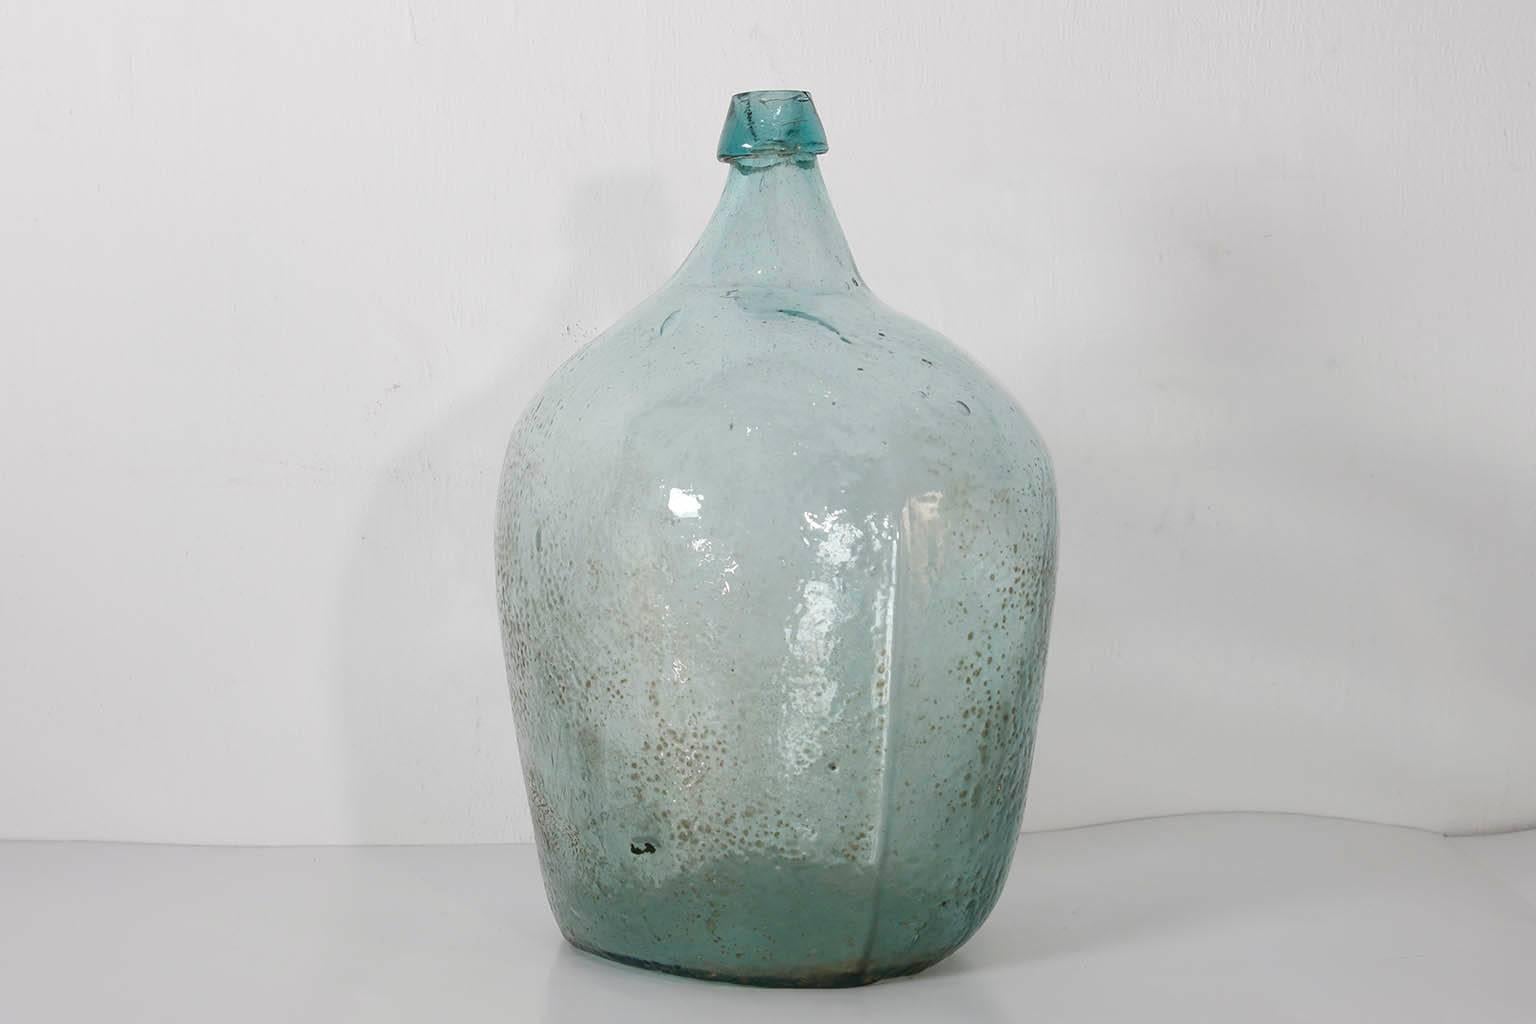 20th Century Set of Three Green Handblow Bottles or Demijohns from Oaxaca Mexico For Sale 3